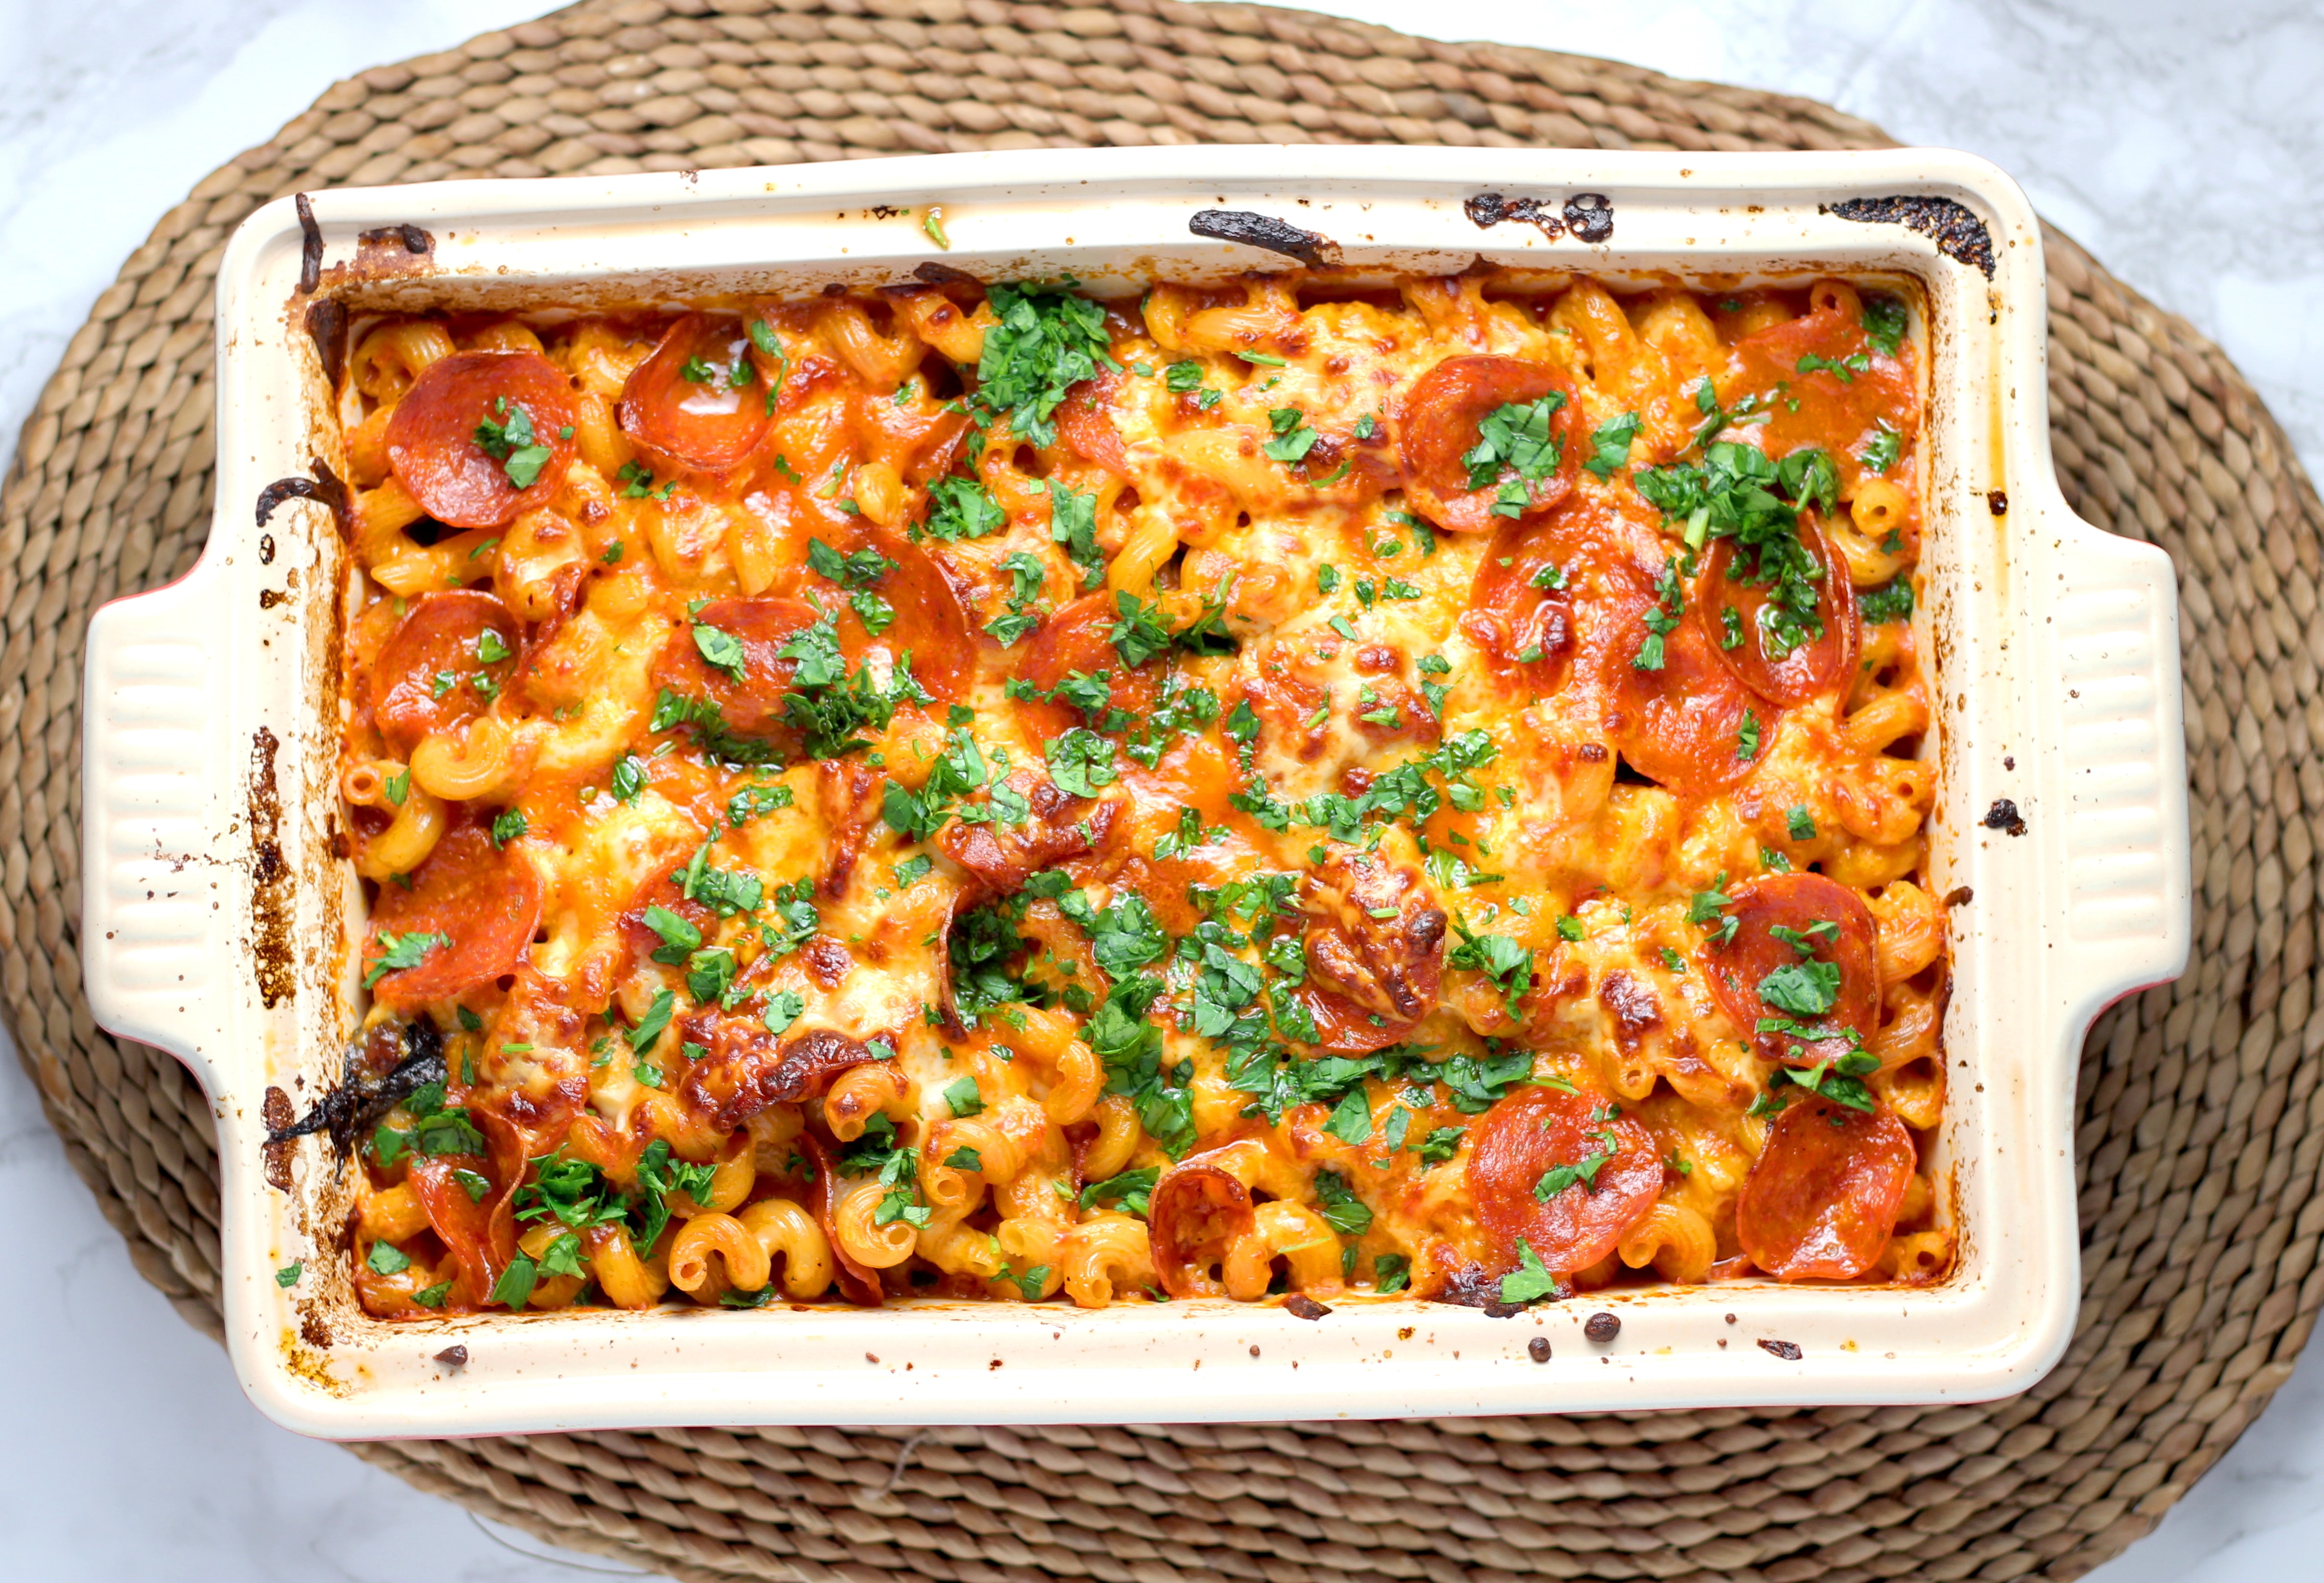 Macaroni and pepperoni casserole with basil sprinkled on top sits in a cream colored baking dish